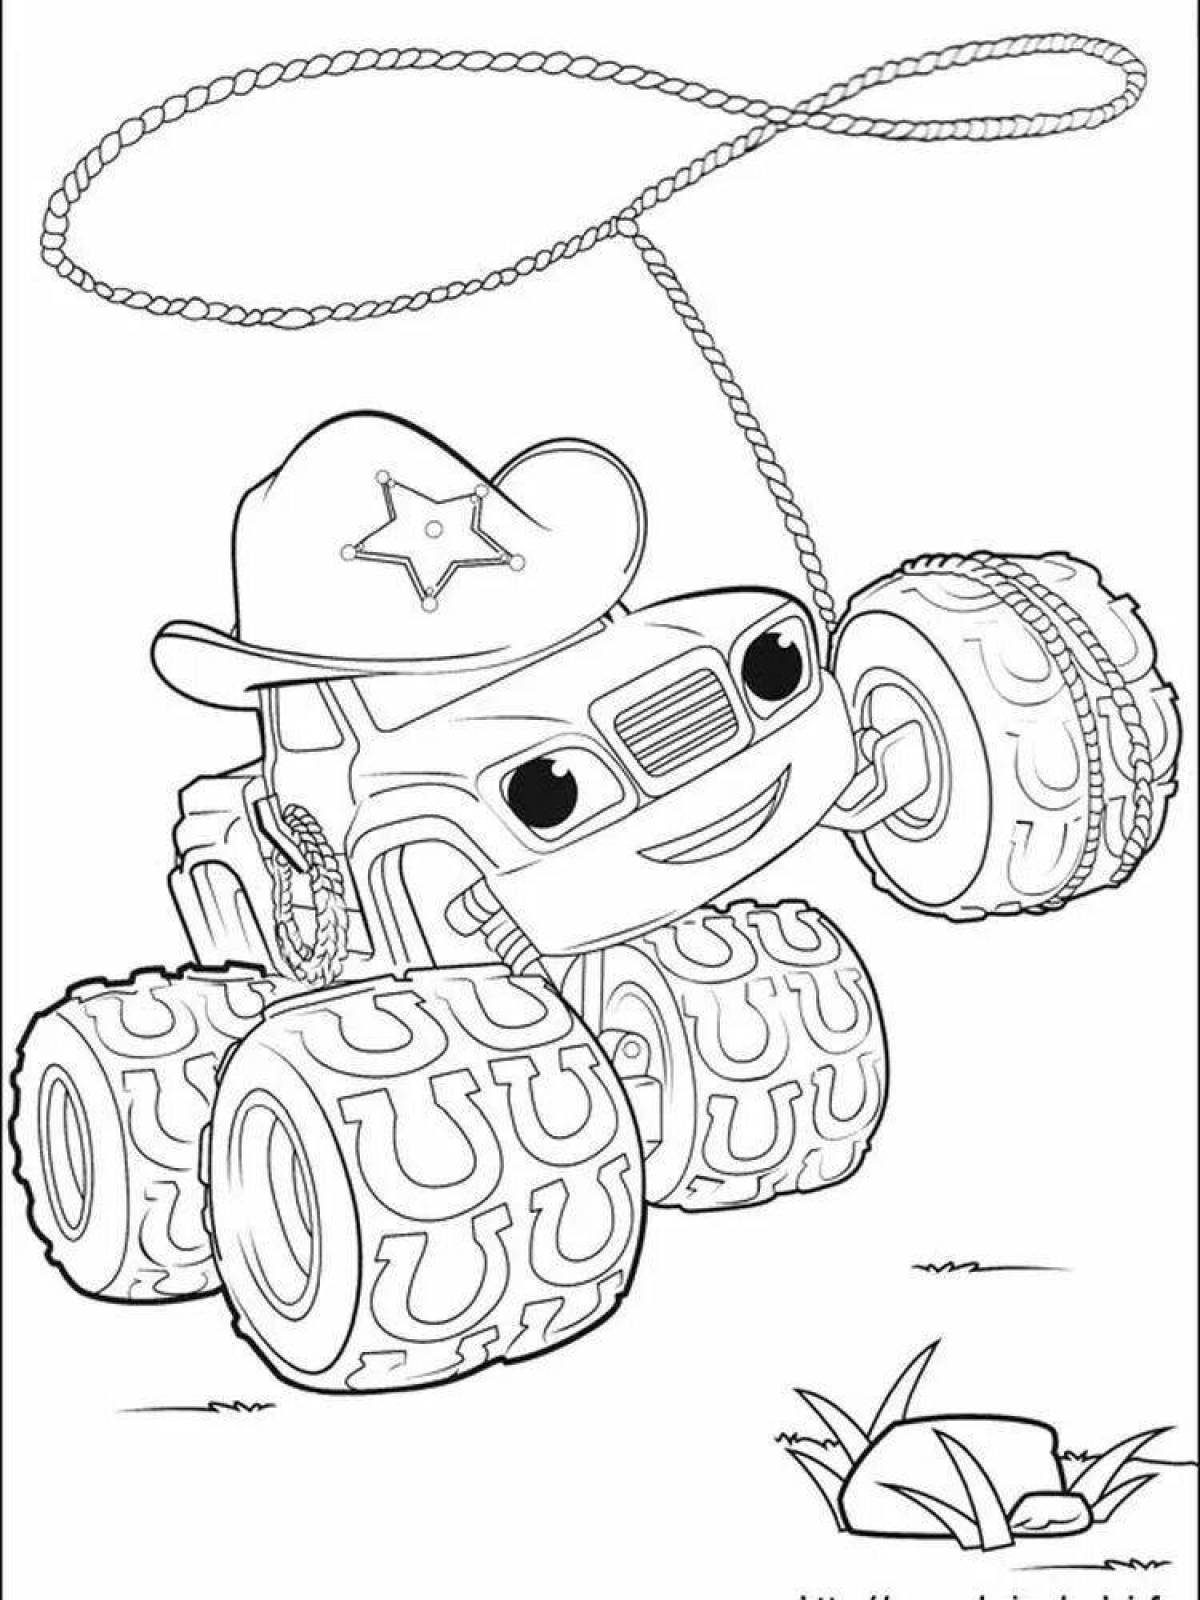 Cucumber torch coloring page